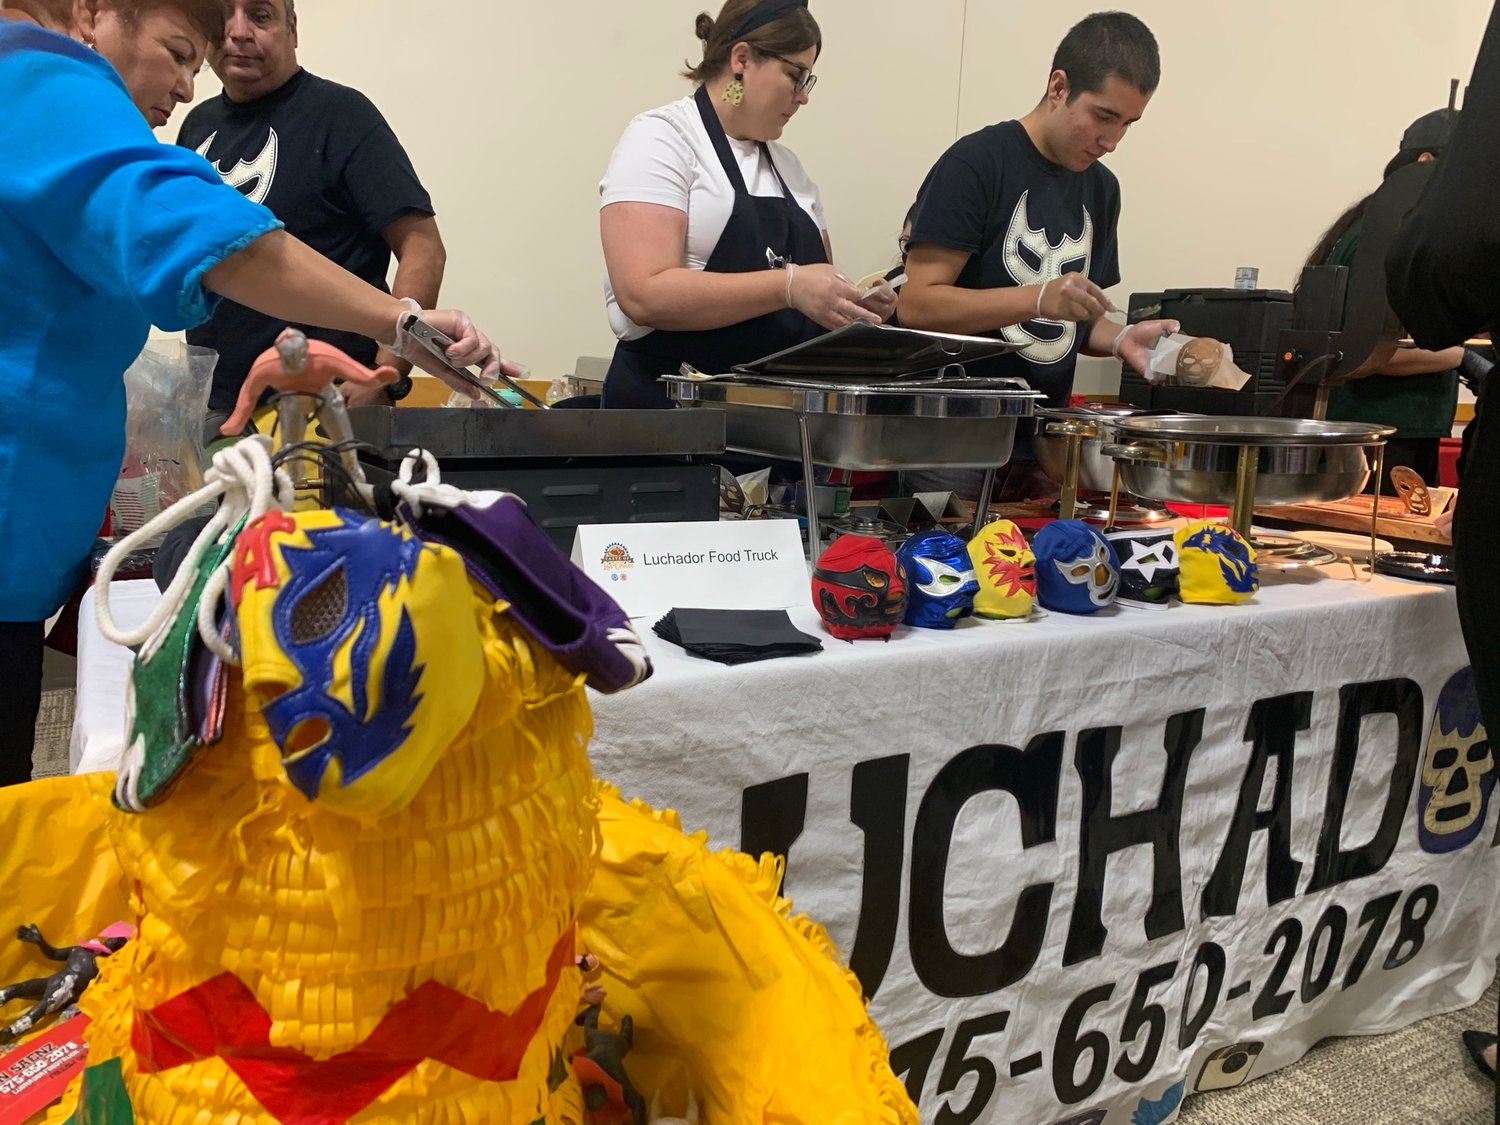 Luchador food truck employees provided delicious samples during Taste of Las Cruces.